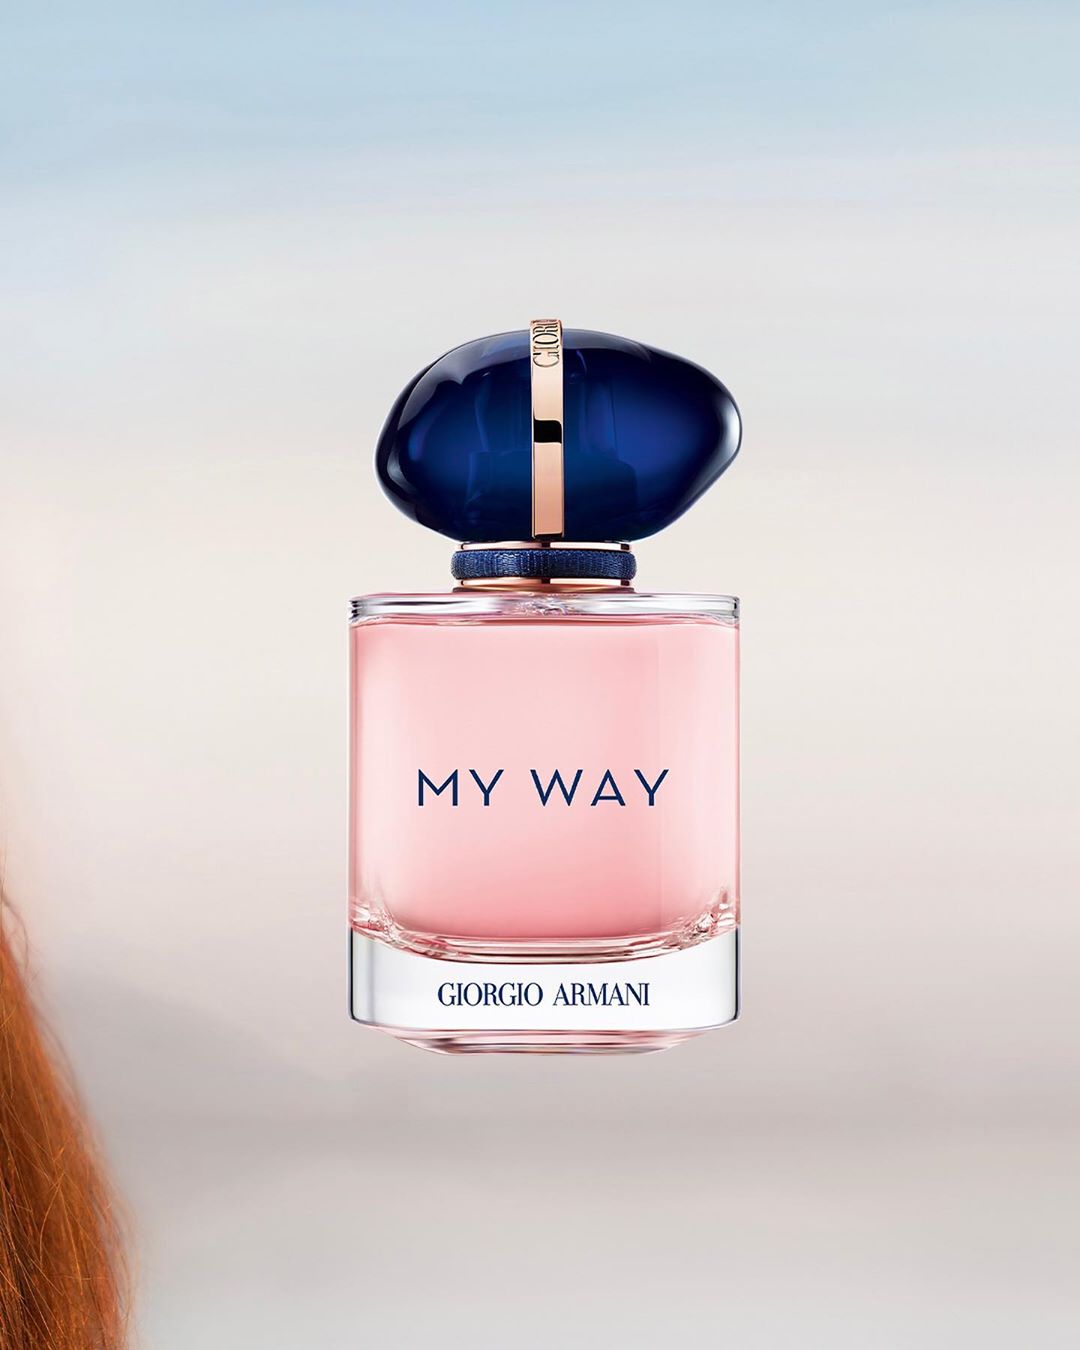 Armani beauty - Introducing MY WAY, the new feminine fragrance, by Giorgio Armani. 

A fusion of the finest ingredients, MY WAY is a bright and powerful invitation to broaden your horizons by living n...